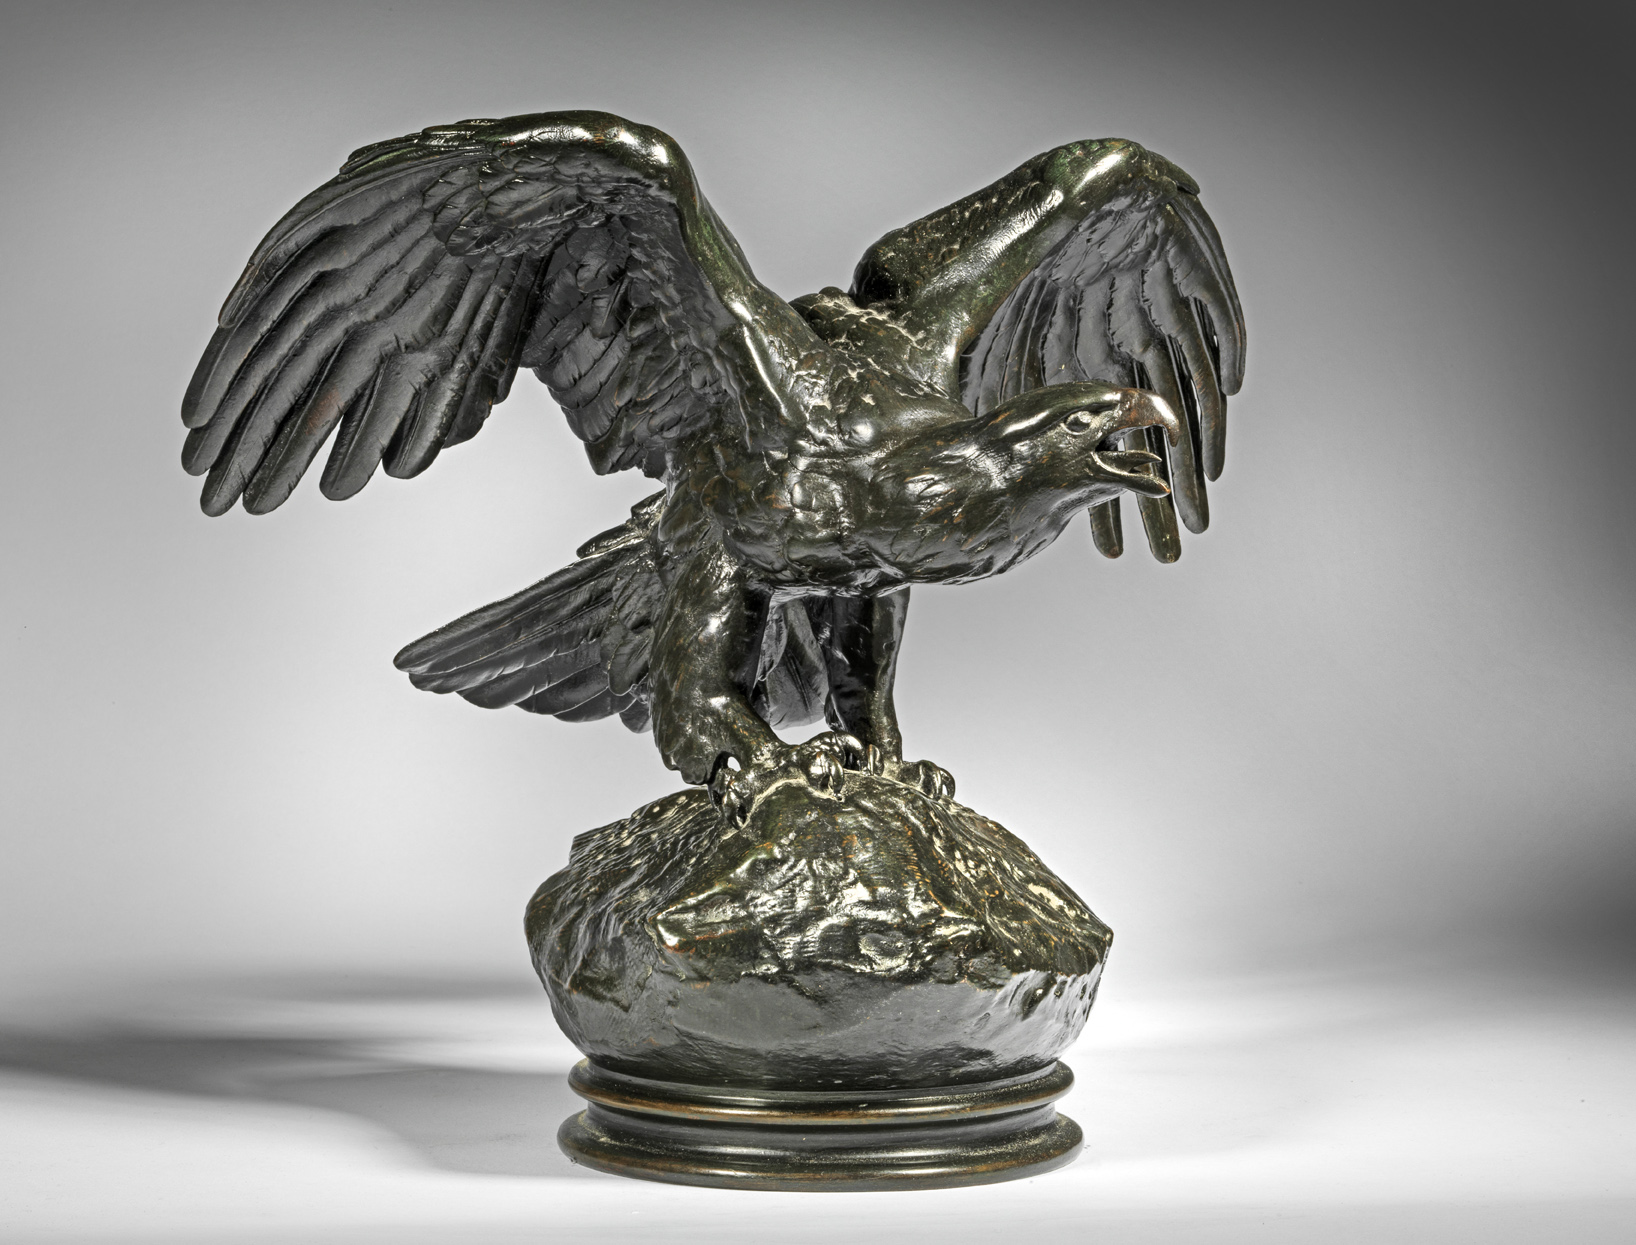 Eagle, Wings Outstretched, c. 1857